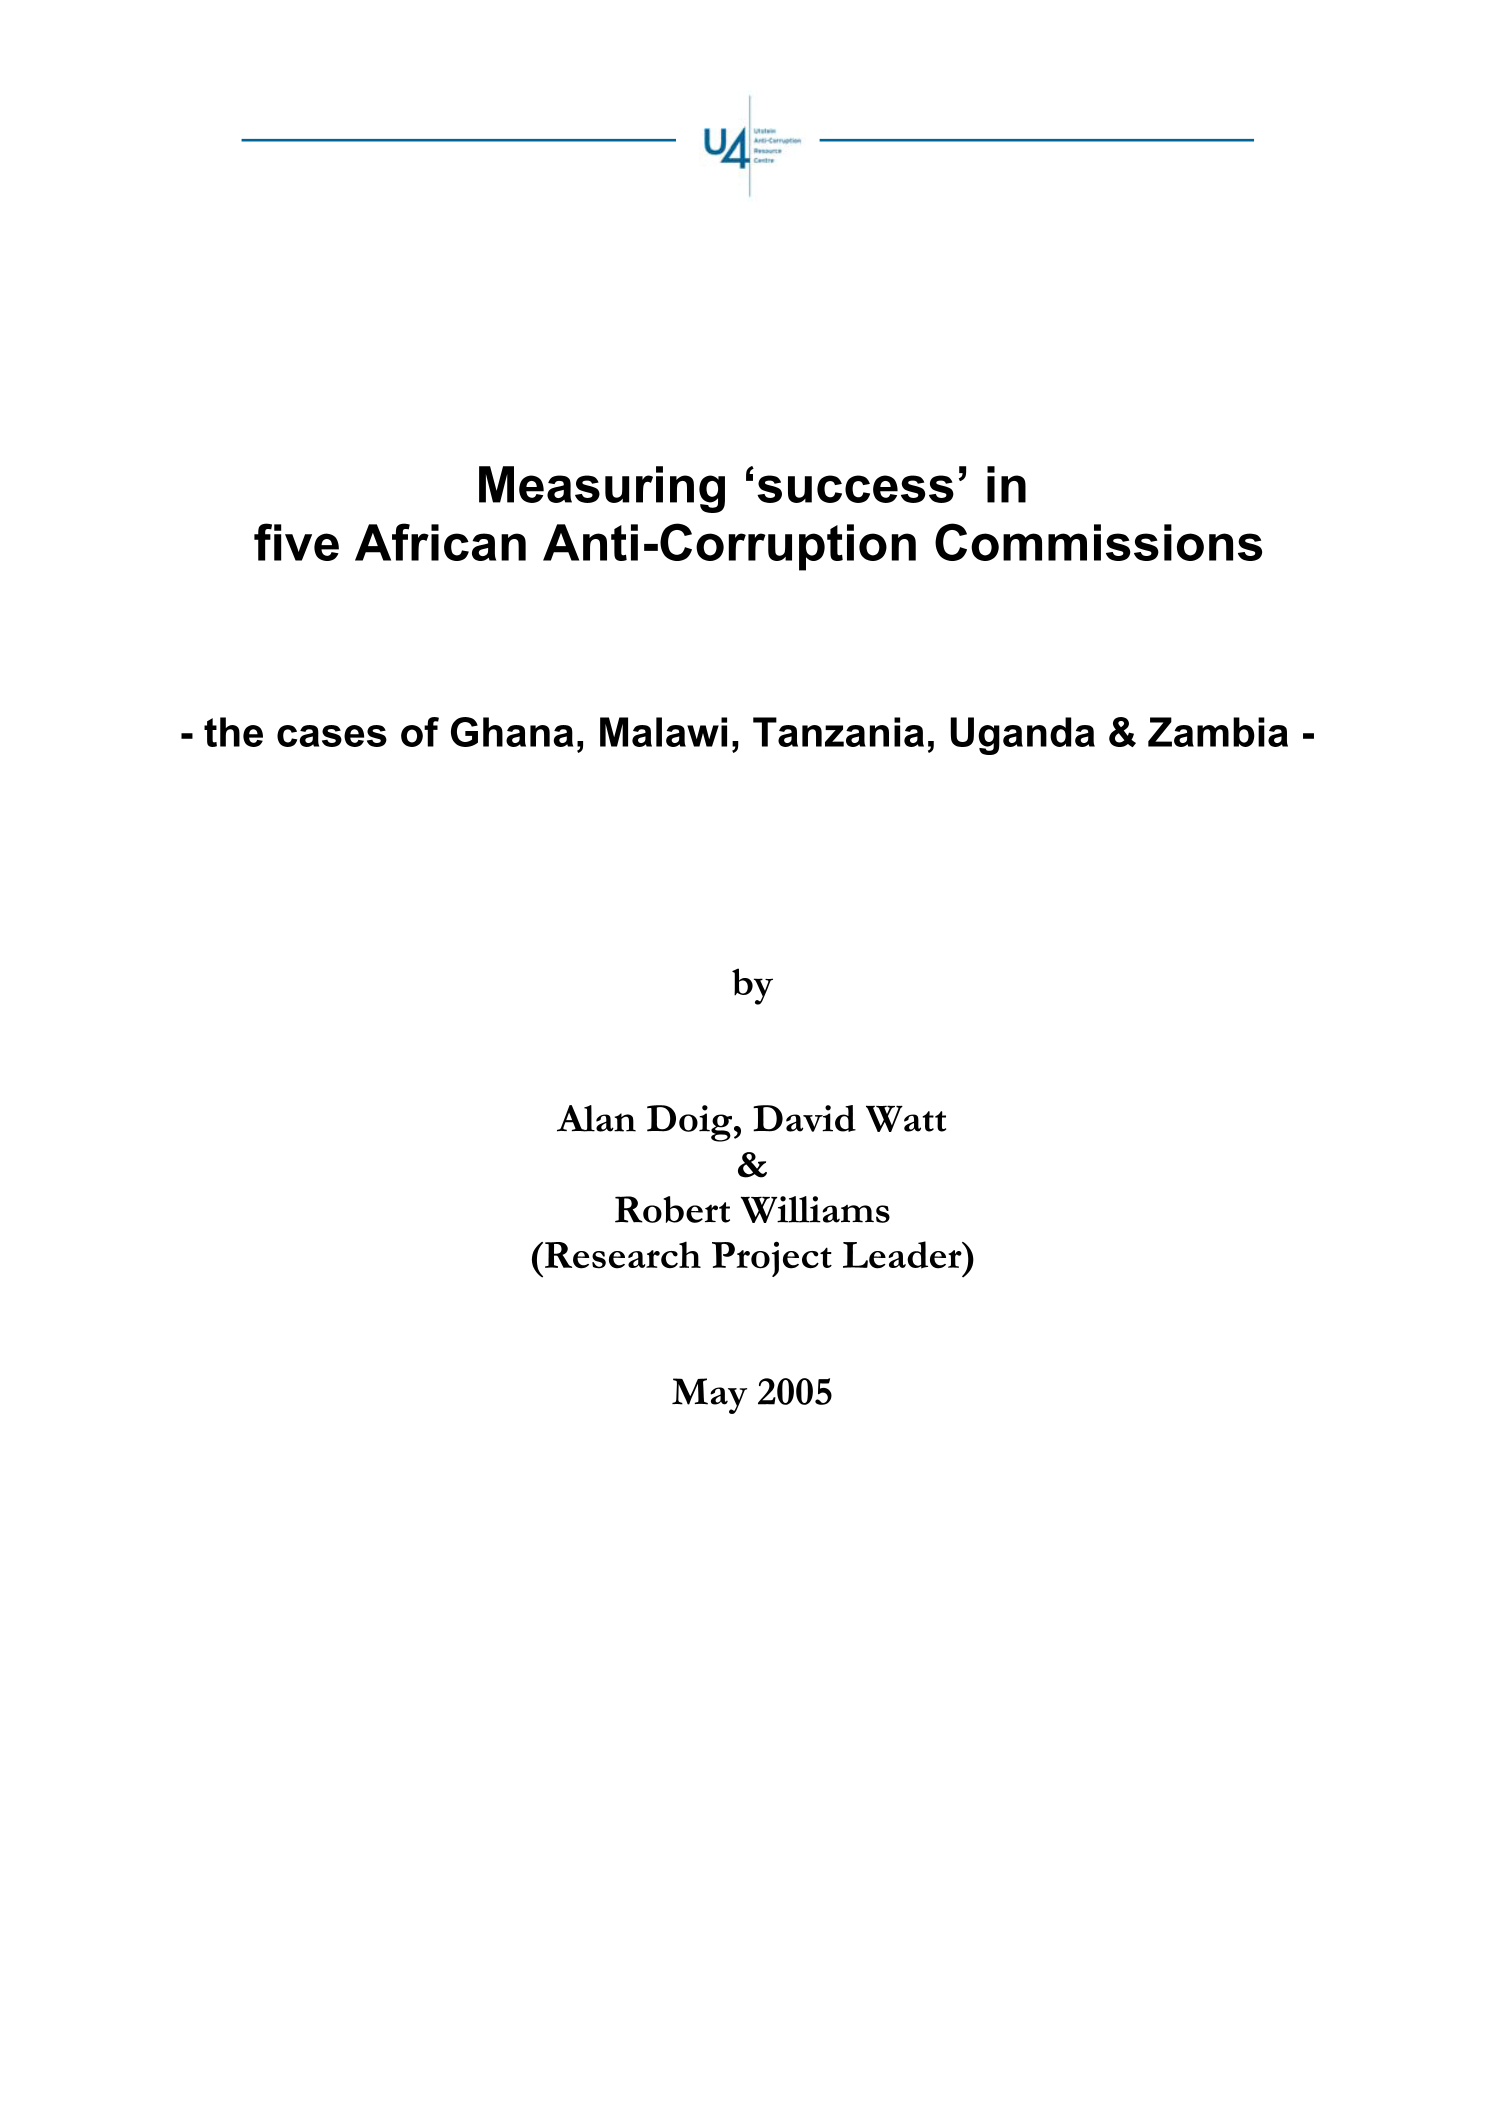 Measuring ‘success’ in five African Anti-Corruption Commissions